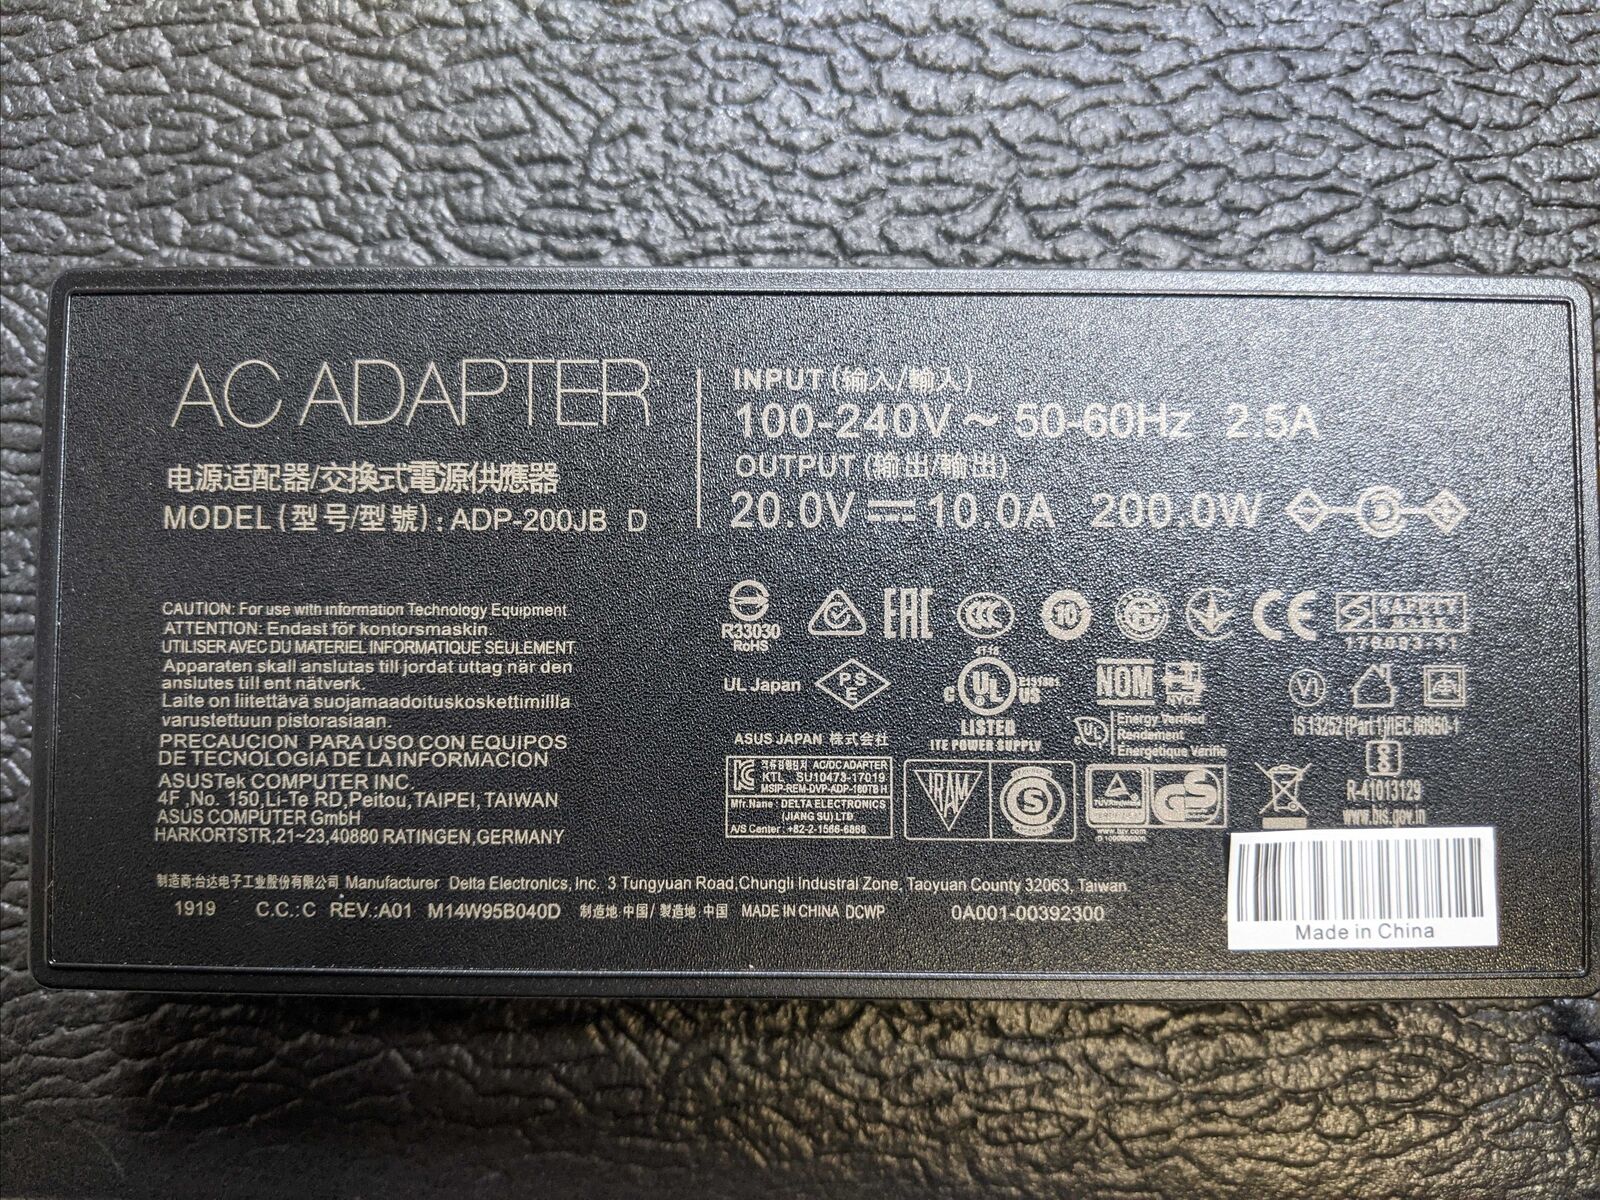 New Original OEM Genuine Asus ADP-200JB D 200W 20V 10A AC Adapter Charger MPN: ADP-200JB D Brand: ASUS UPC: Does - Click Image to Close